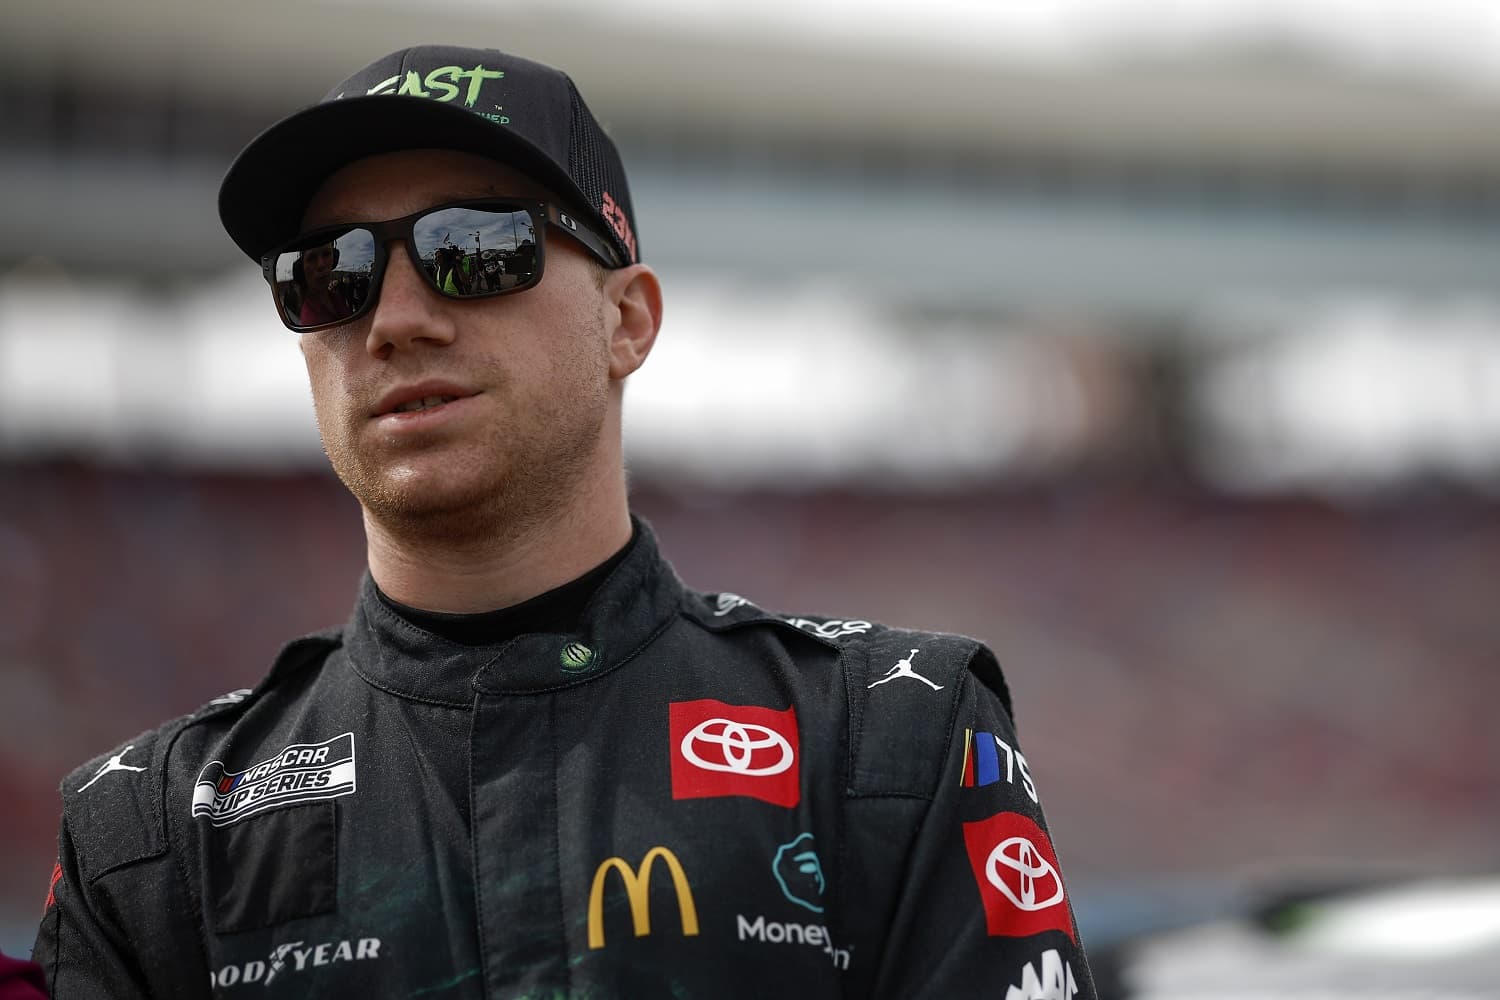 Tyler Reddick waits on the grid during qualifying for the NASCAR Cup Series United Rentals Work United 500 at Phoenix Raceway on March 11, 2023.